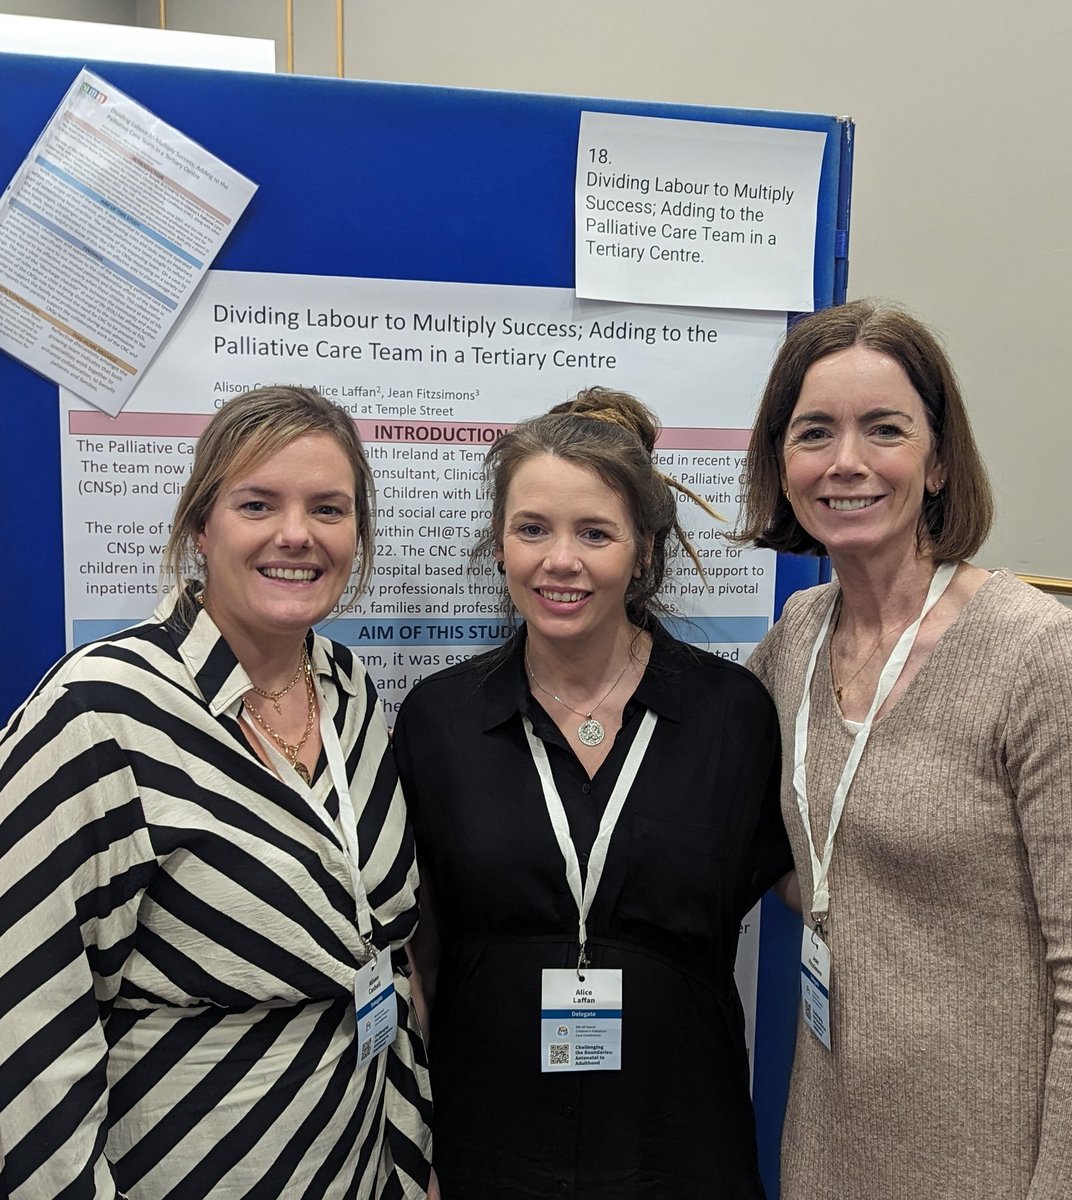 We're delighted to showcase the collaborative work we do in @TempleStreetHos in #childrenspalliatovecare at #cpcc2024 @LaffanAlice24 @FitzsimonsJean